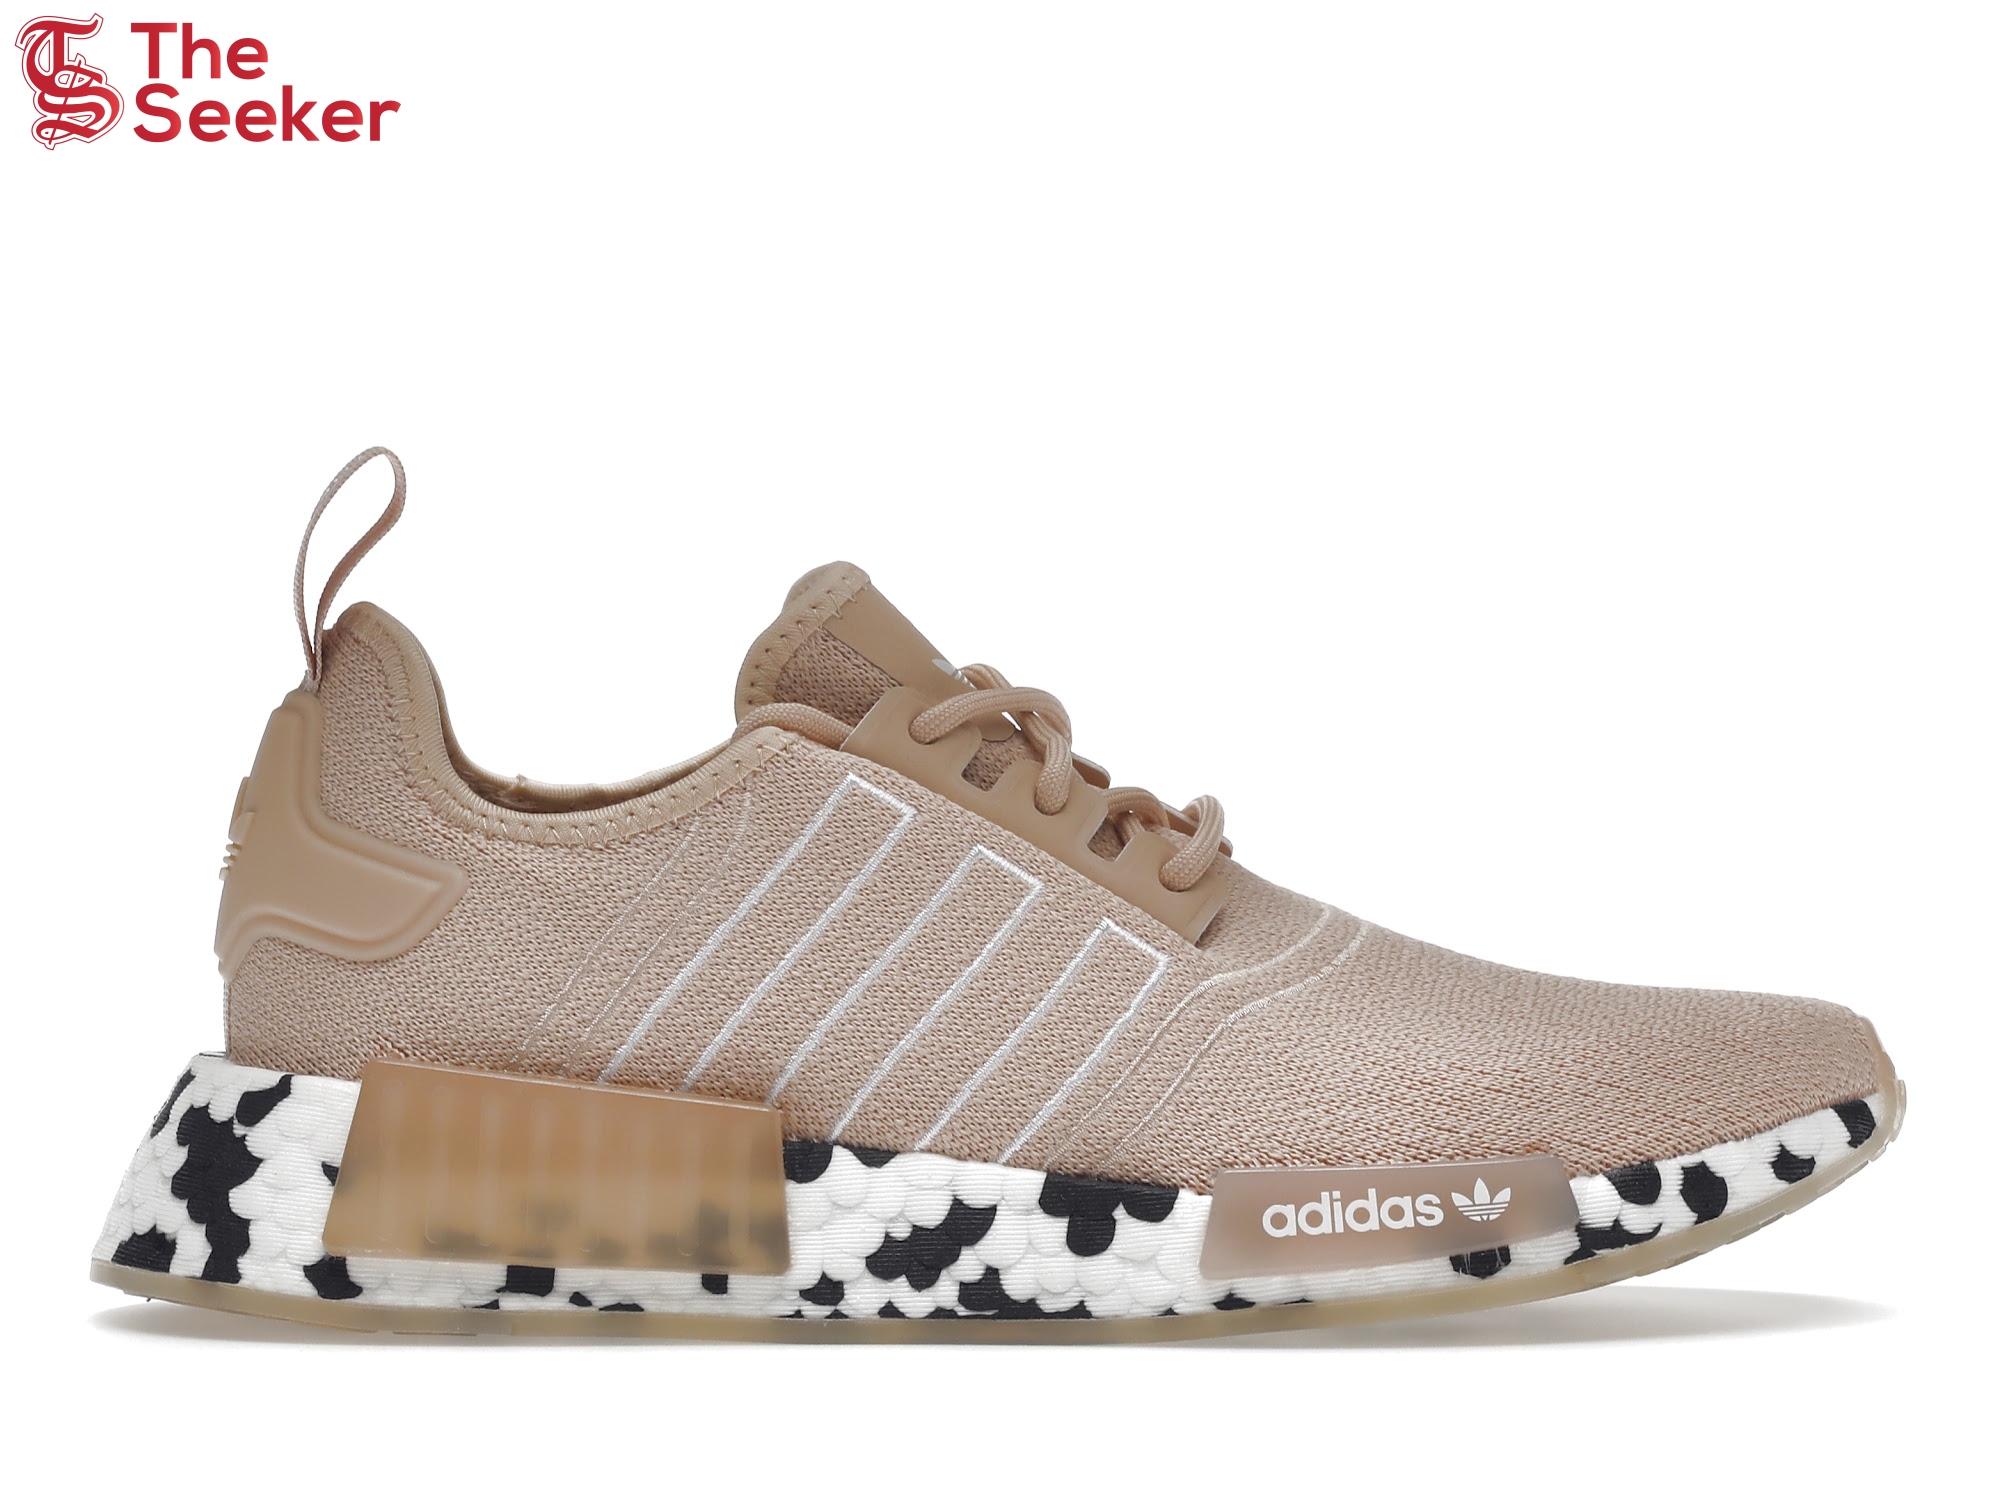 adidas NMD R1 Halo Blush Spotted (Women's)